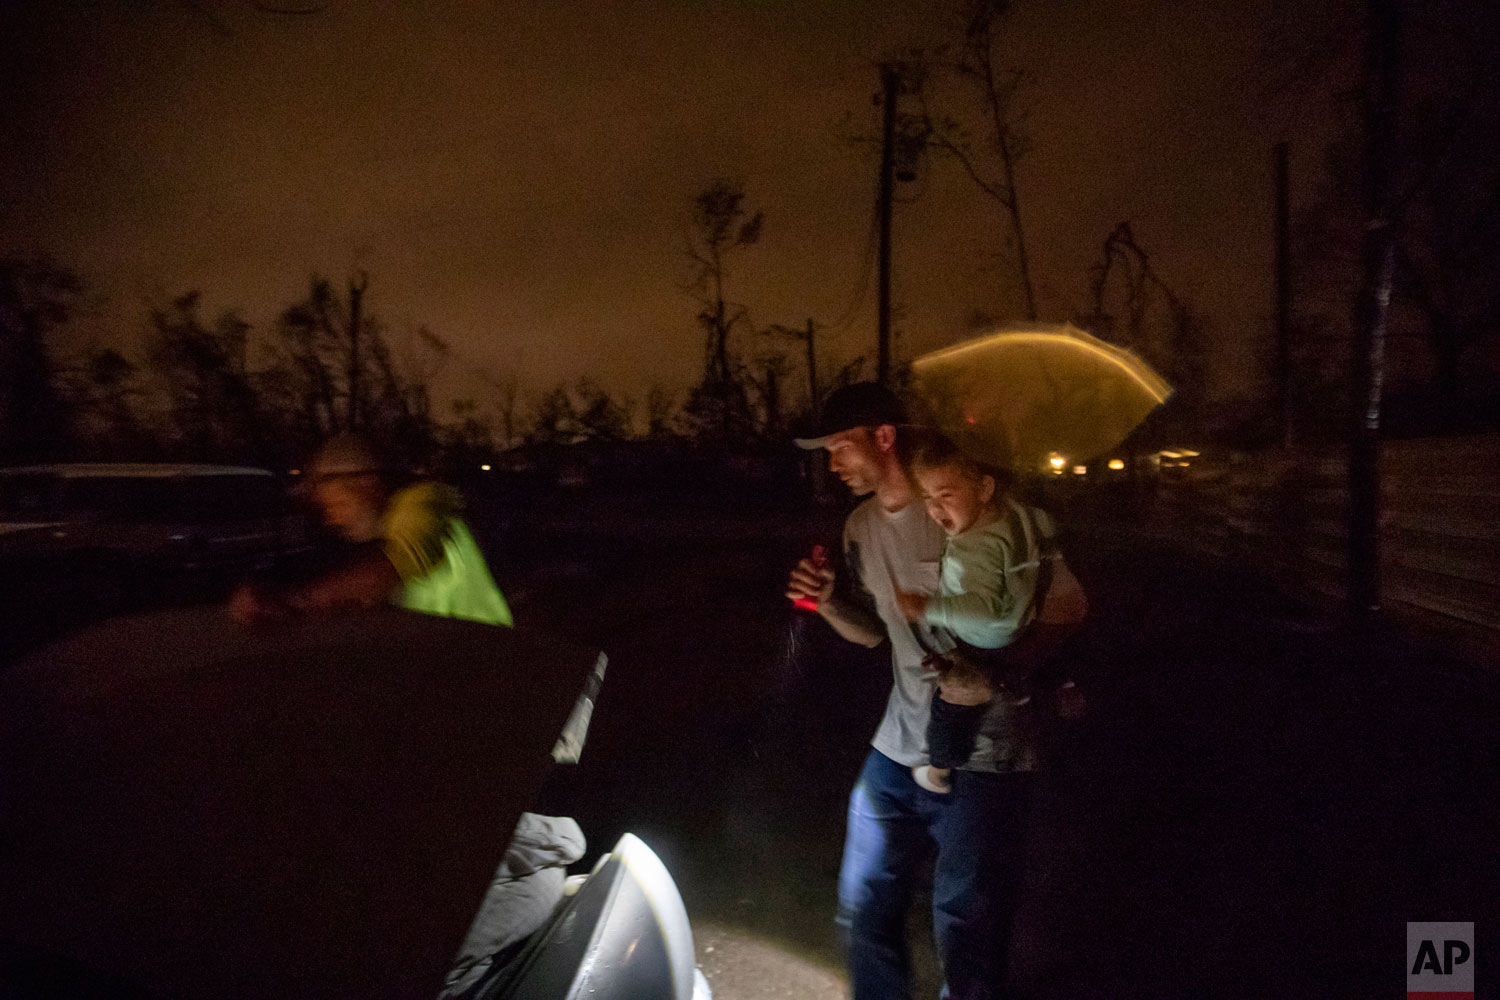  Twenty-month-old Neala Clark cries as her mother's fiancé, Gary LaPlant, loads their personal belongings from the tent they're living in into a car taking them to a halfway home LaPlant found for them in the middle of a rain storm in Youngstown, Fla